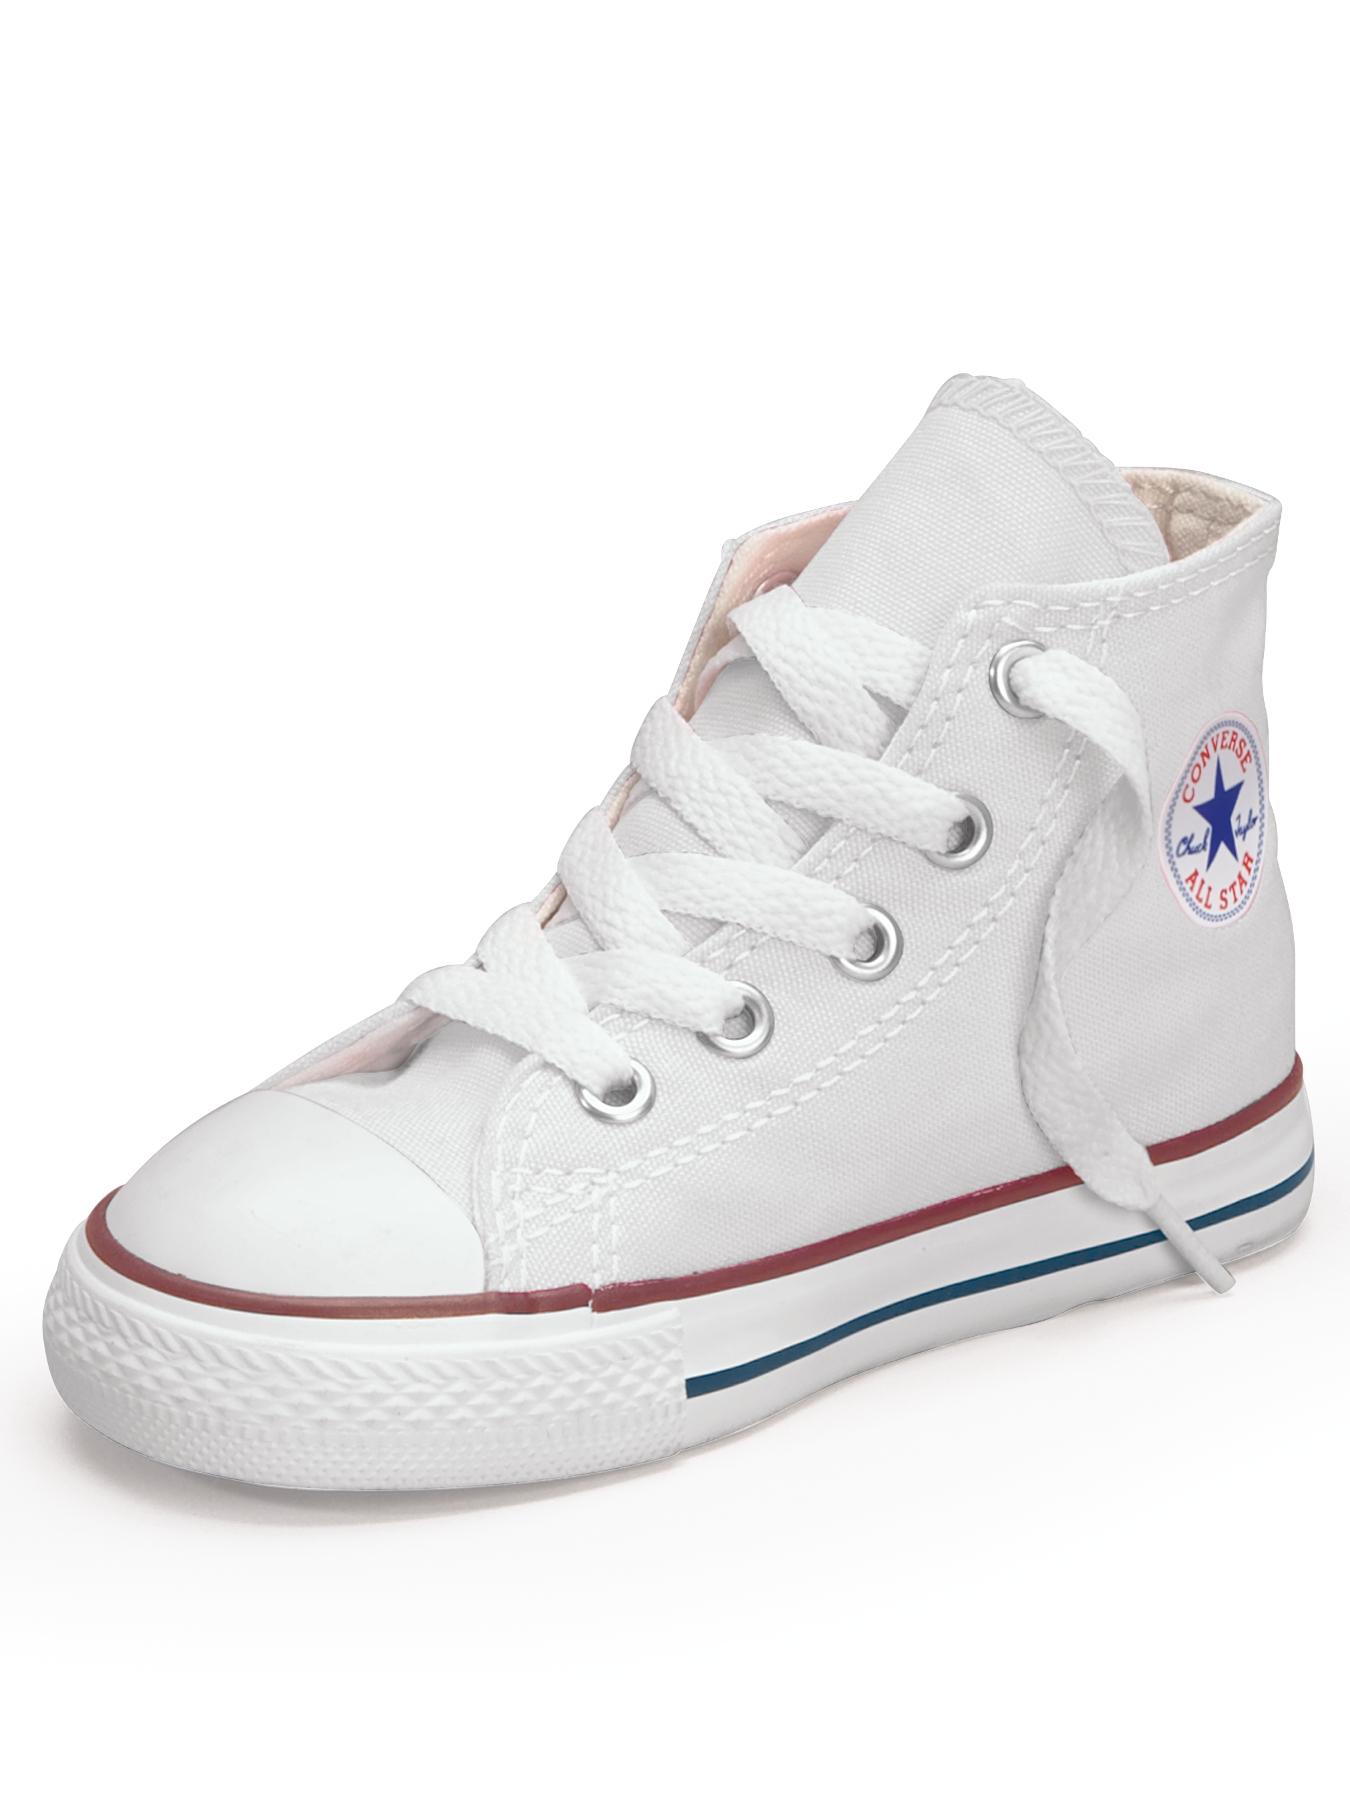 Converse Childrens Trainers filmuthyrning.nu